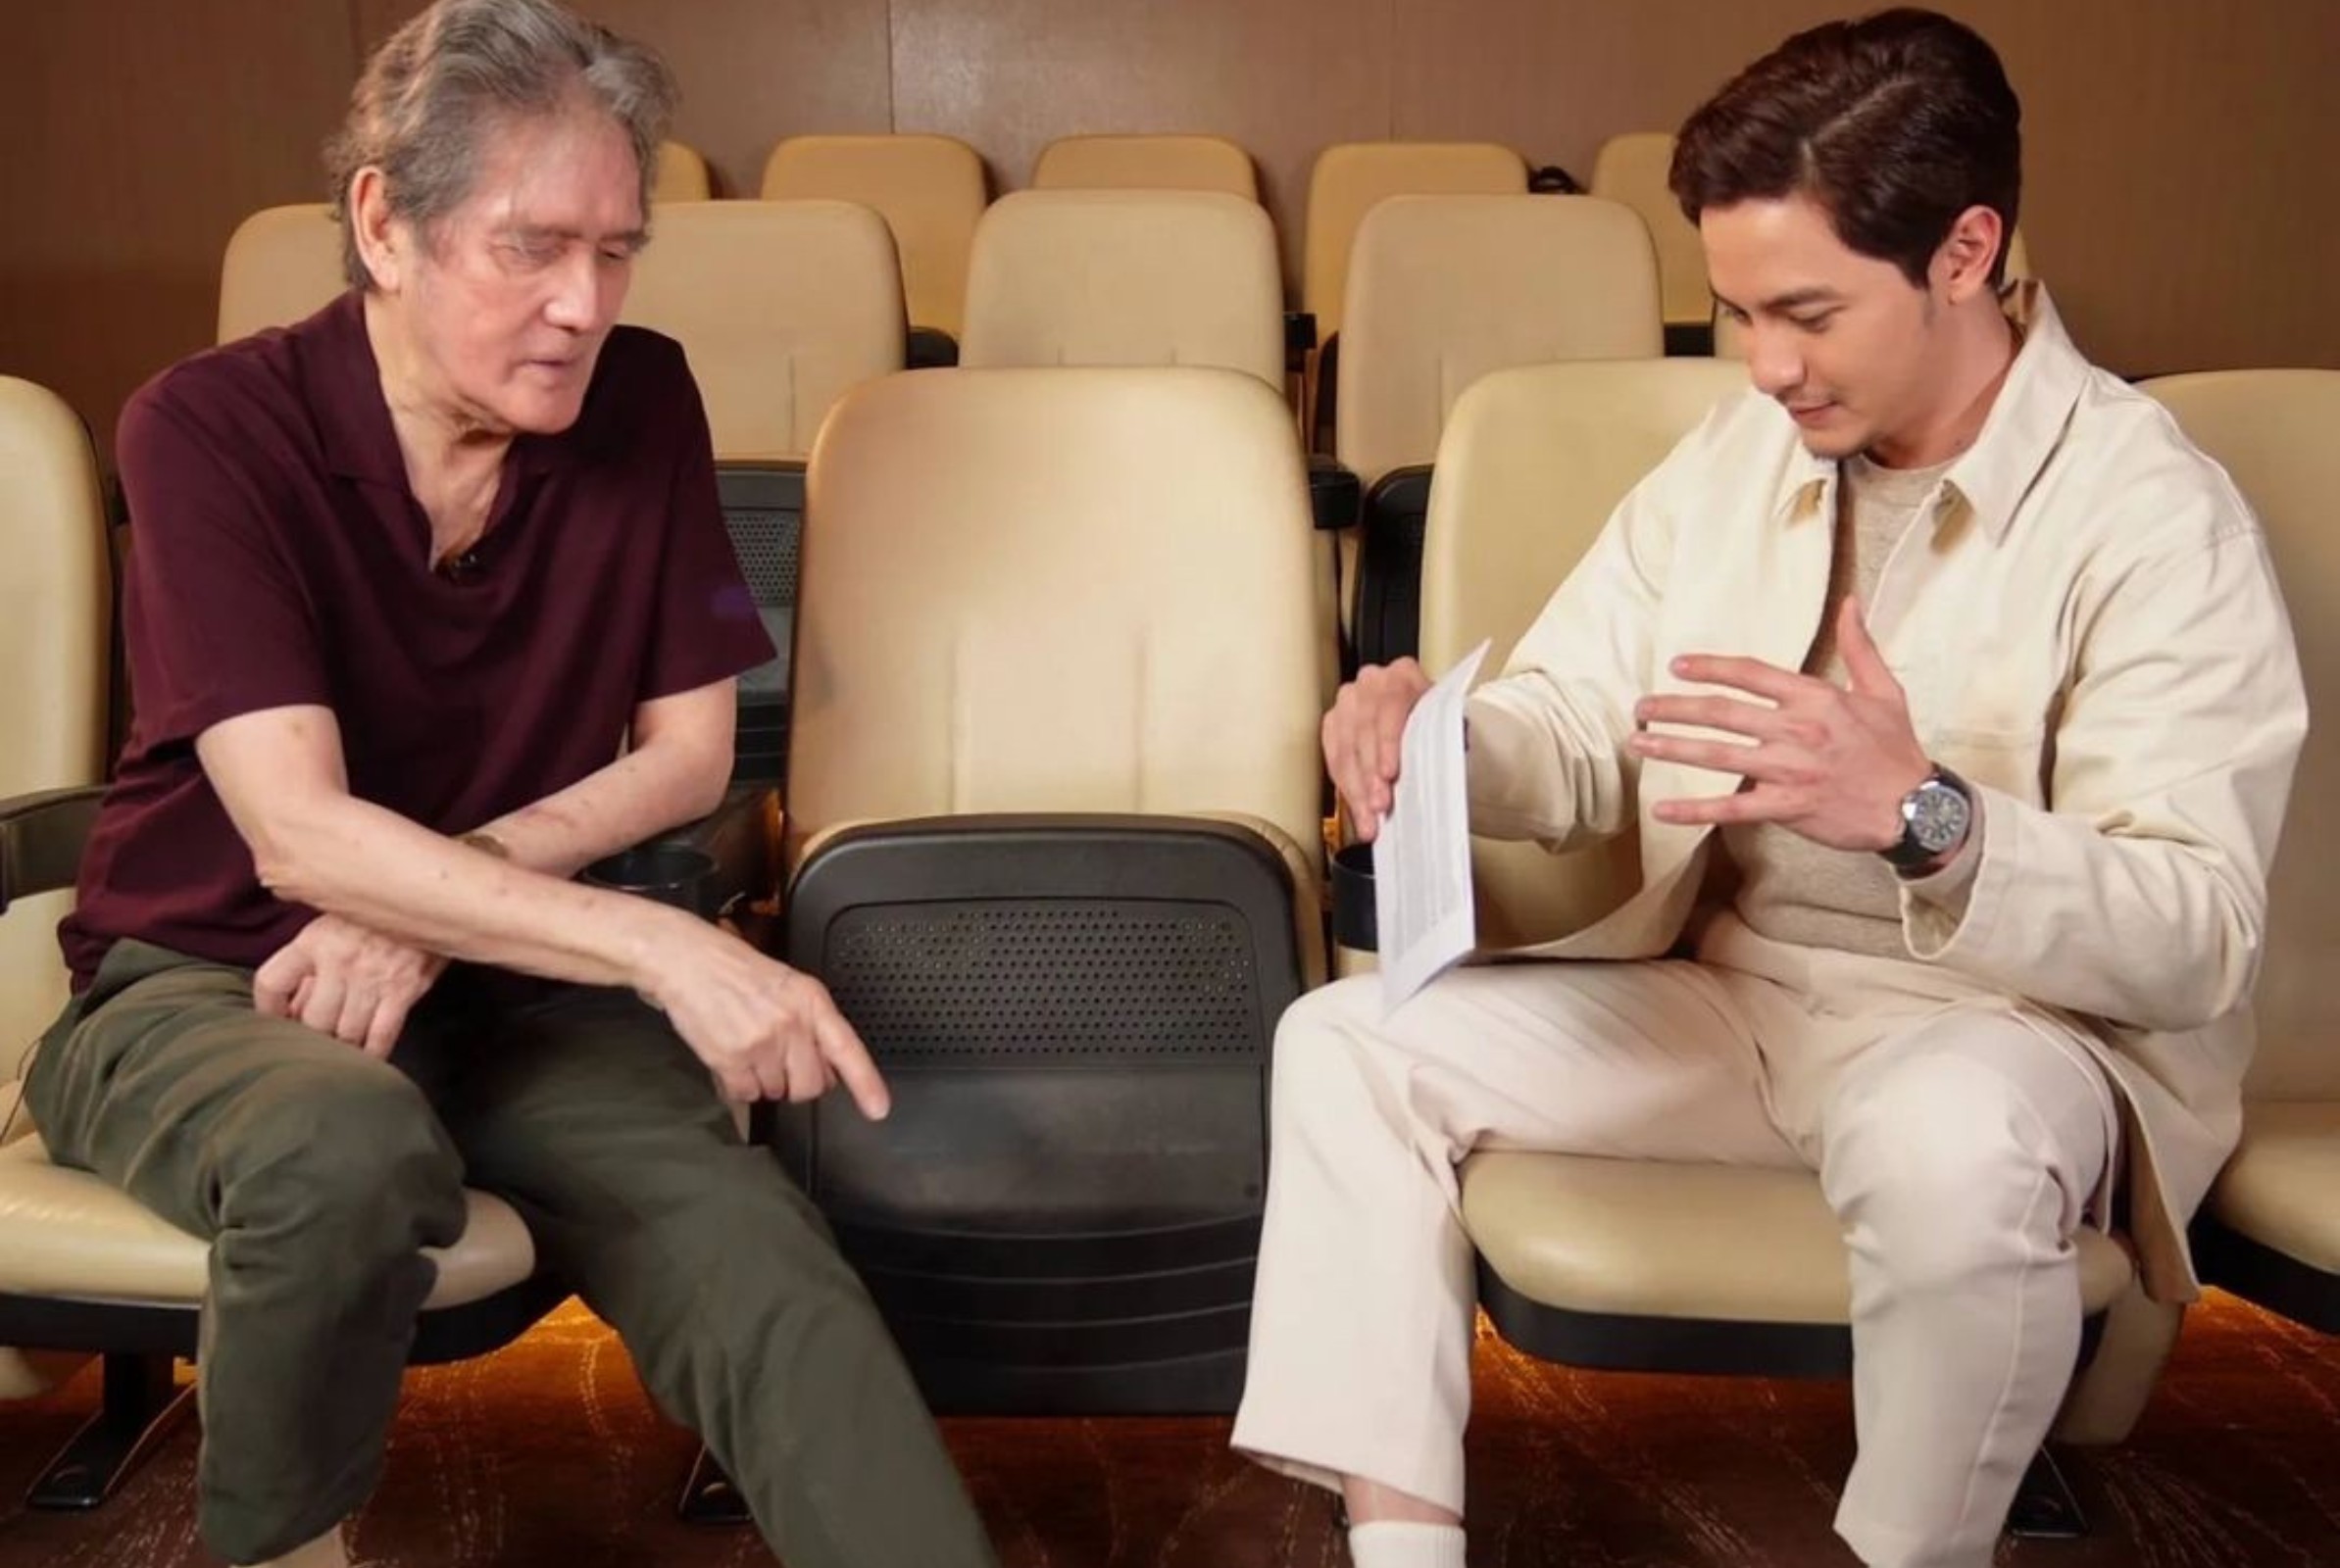 Johnny "Mr. M" Manahan and Alden Richards Interview